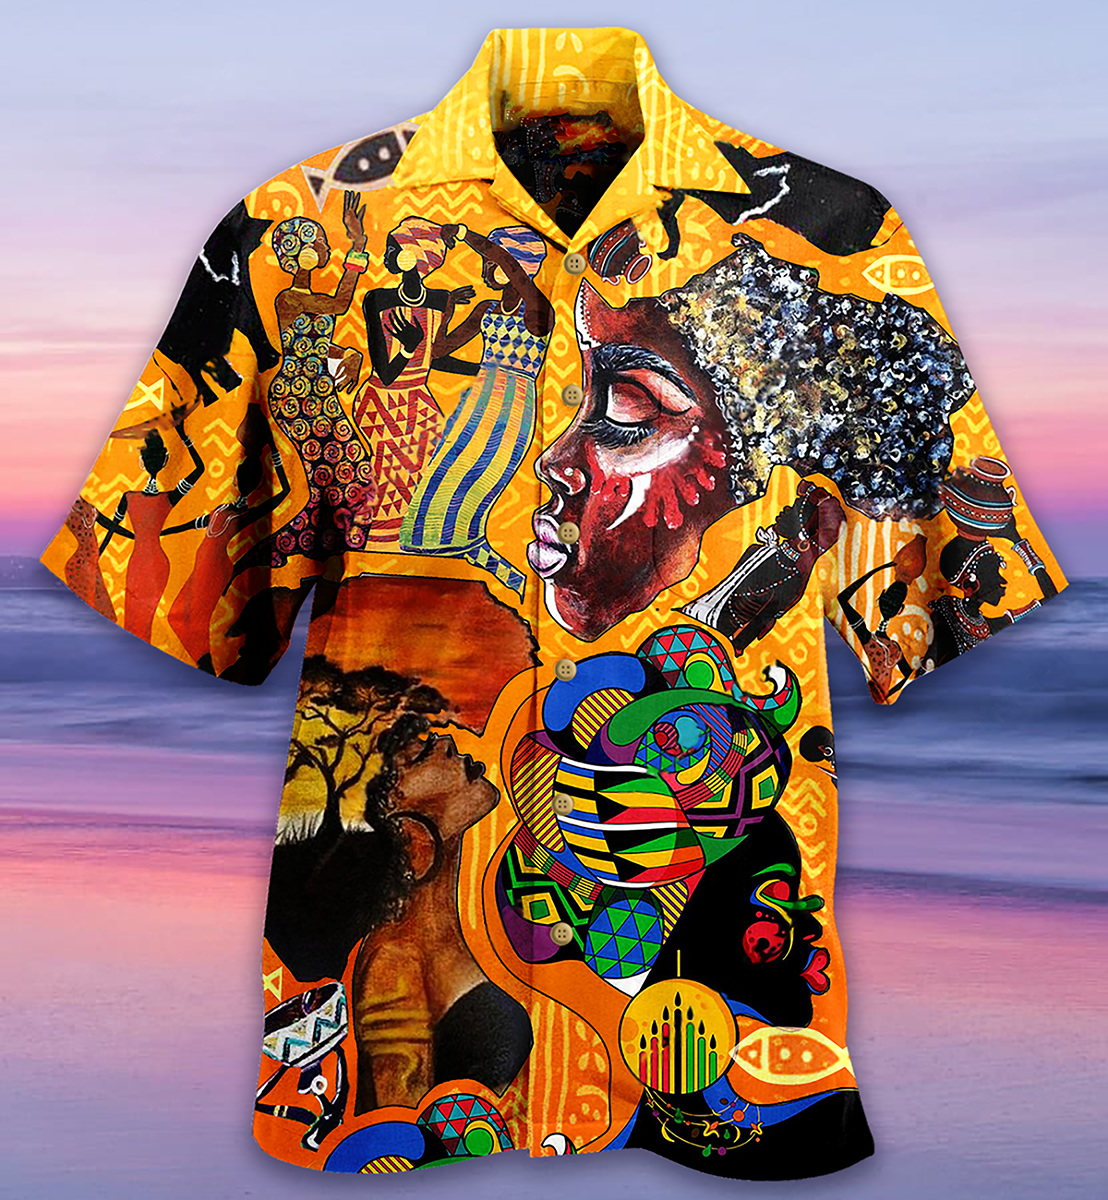 Africa You Cannot Forget Africa In Your Life - Hawaiian Shirt - Owls Matrix LTD